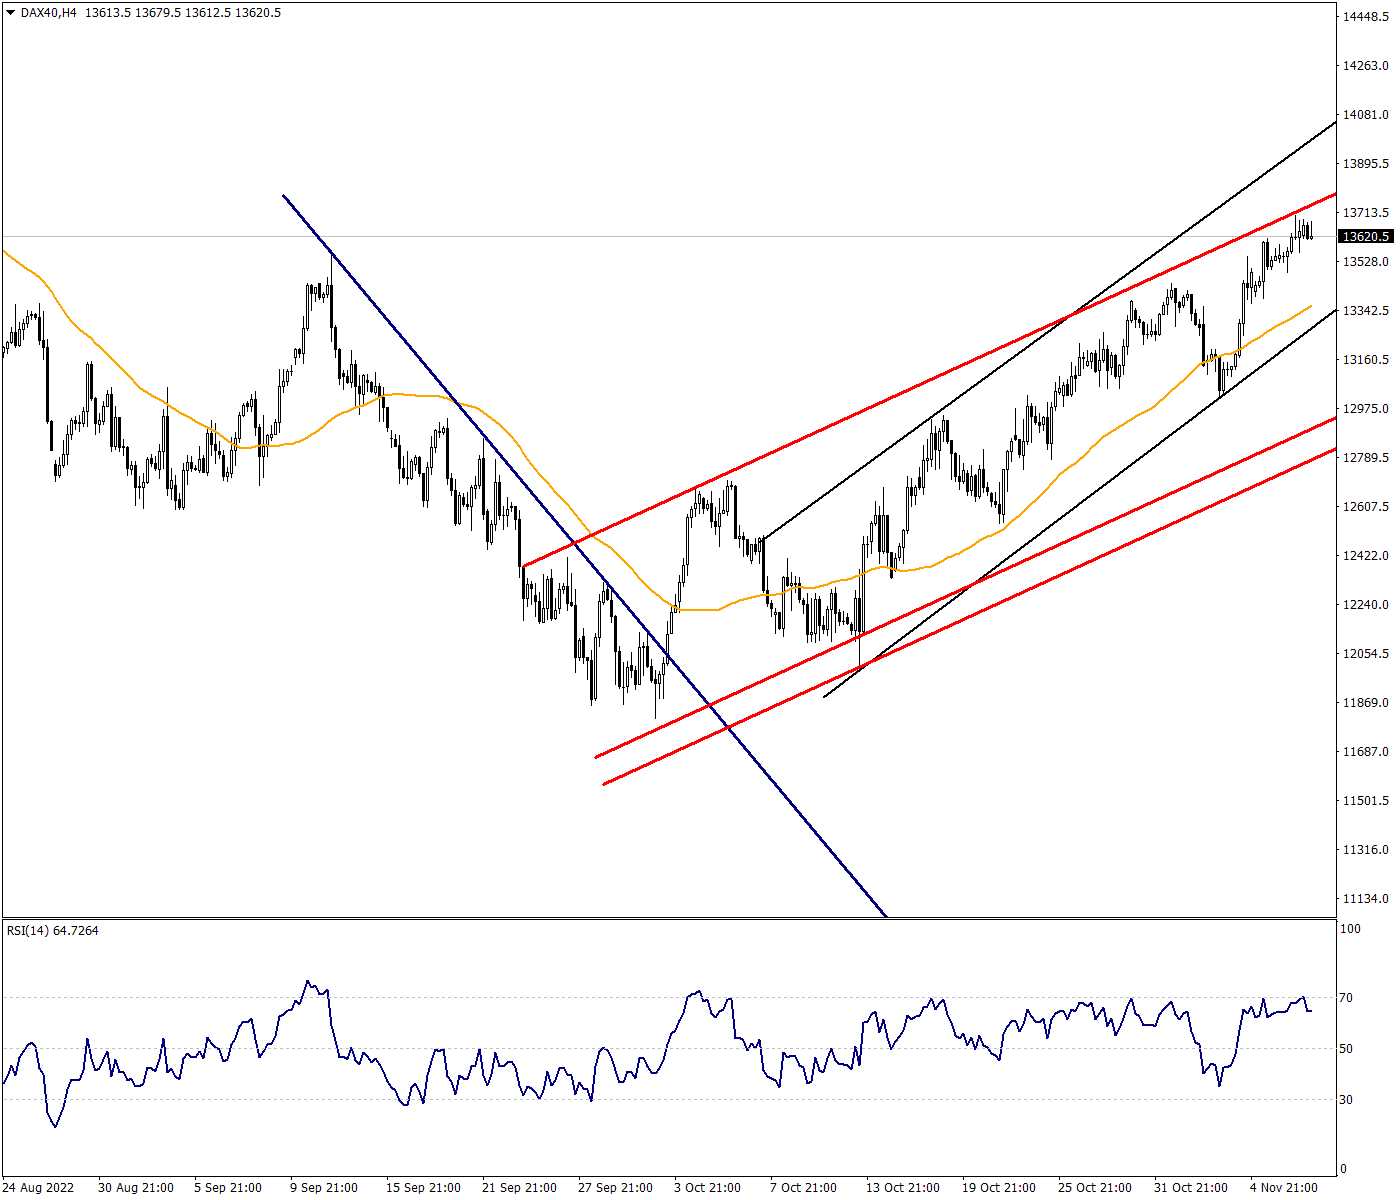 The Surprise of Industrial Production Continues in DAX40